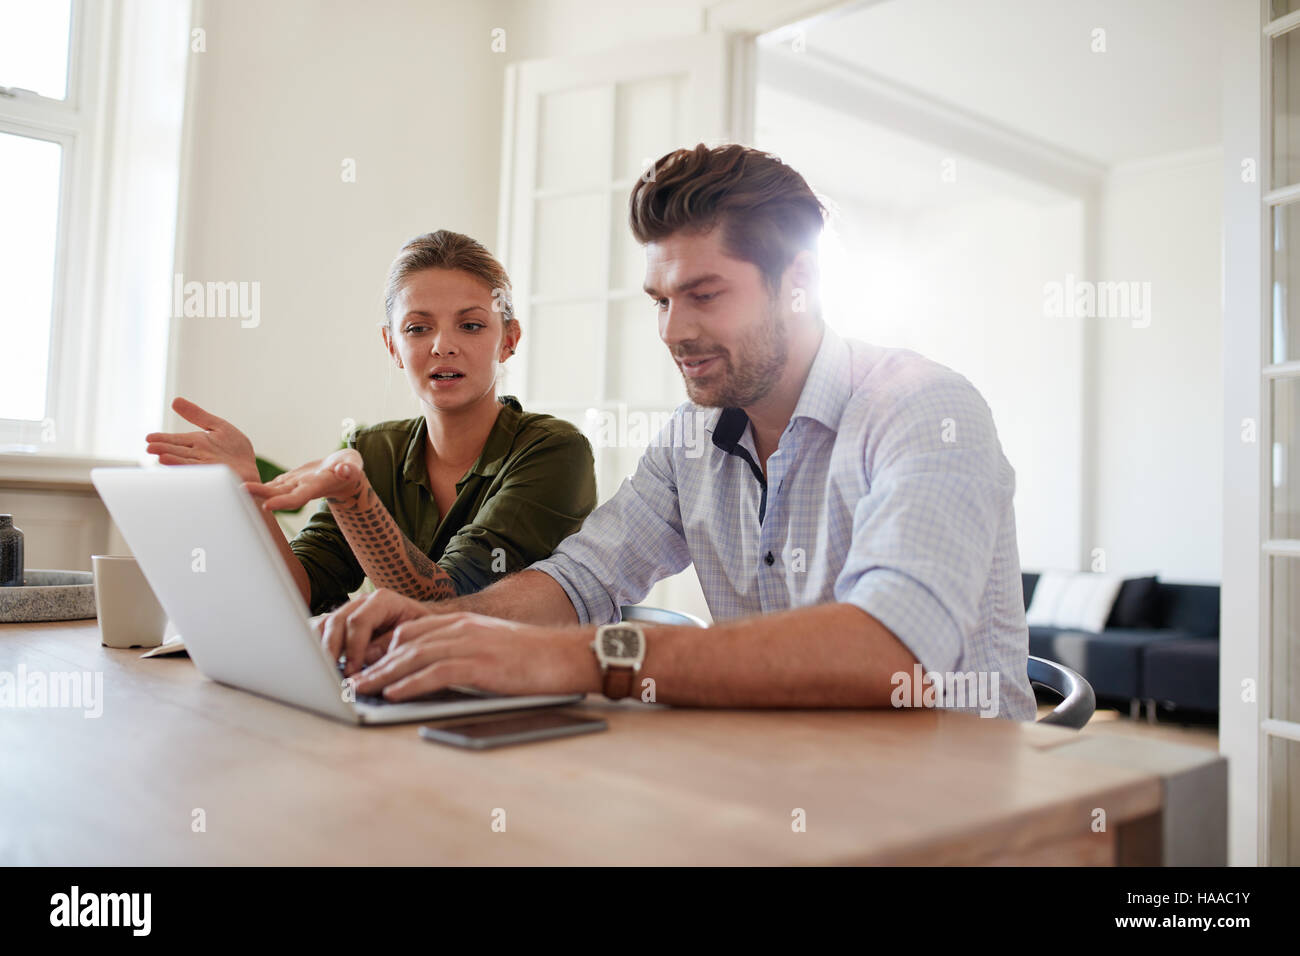 Shot of young couple sitting together at table and working on laptop. Young man and woman at home using laptop. Stock Photo